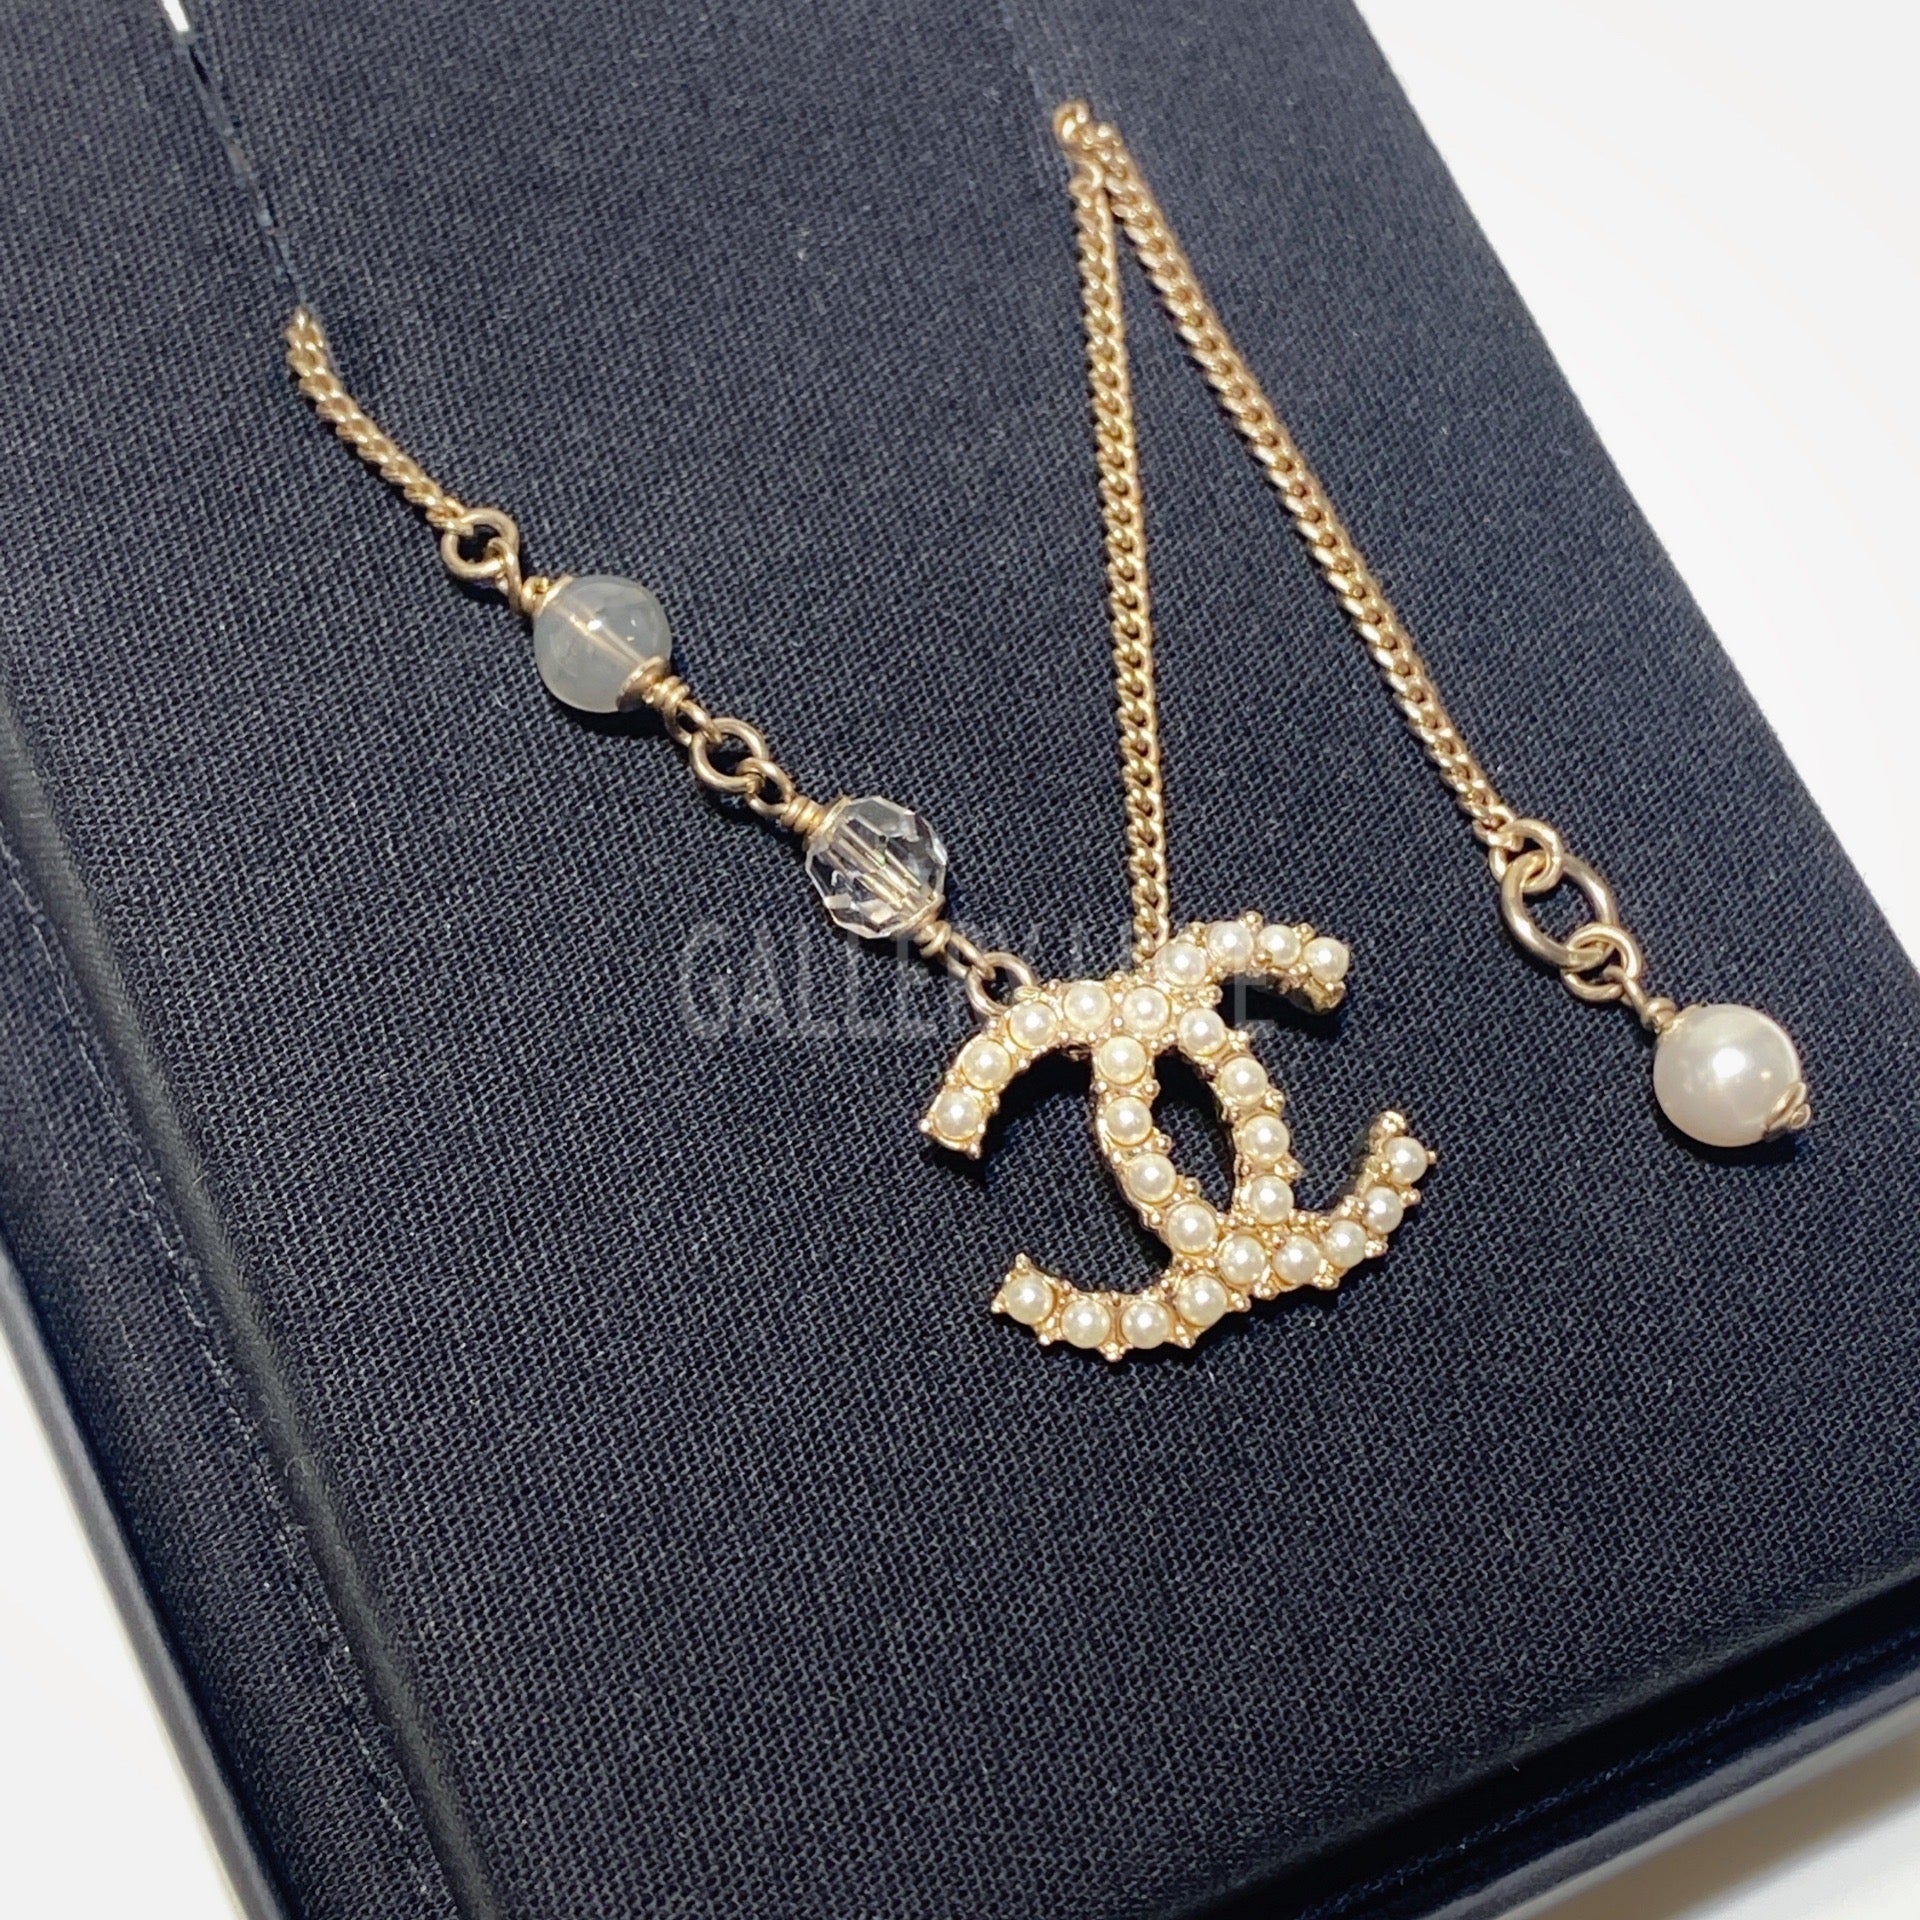 CHANEL Necklace Coco Mark Metal/Fake Pearl Gold/White Ladies